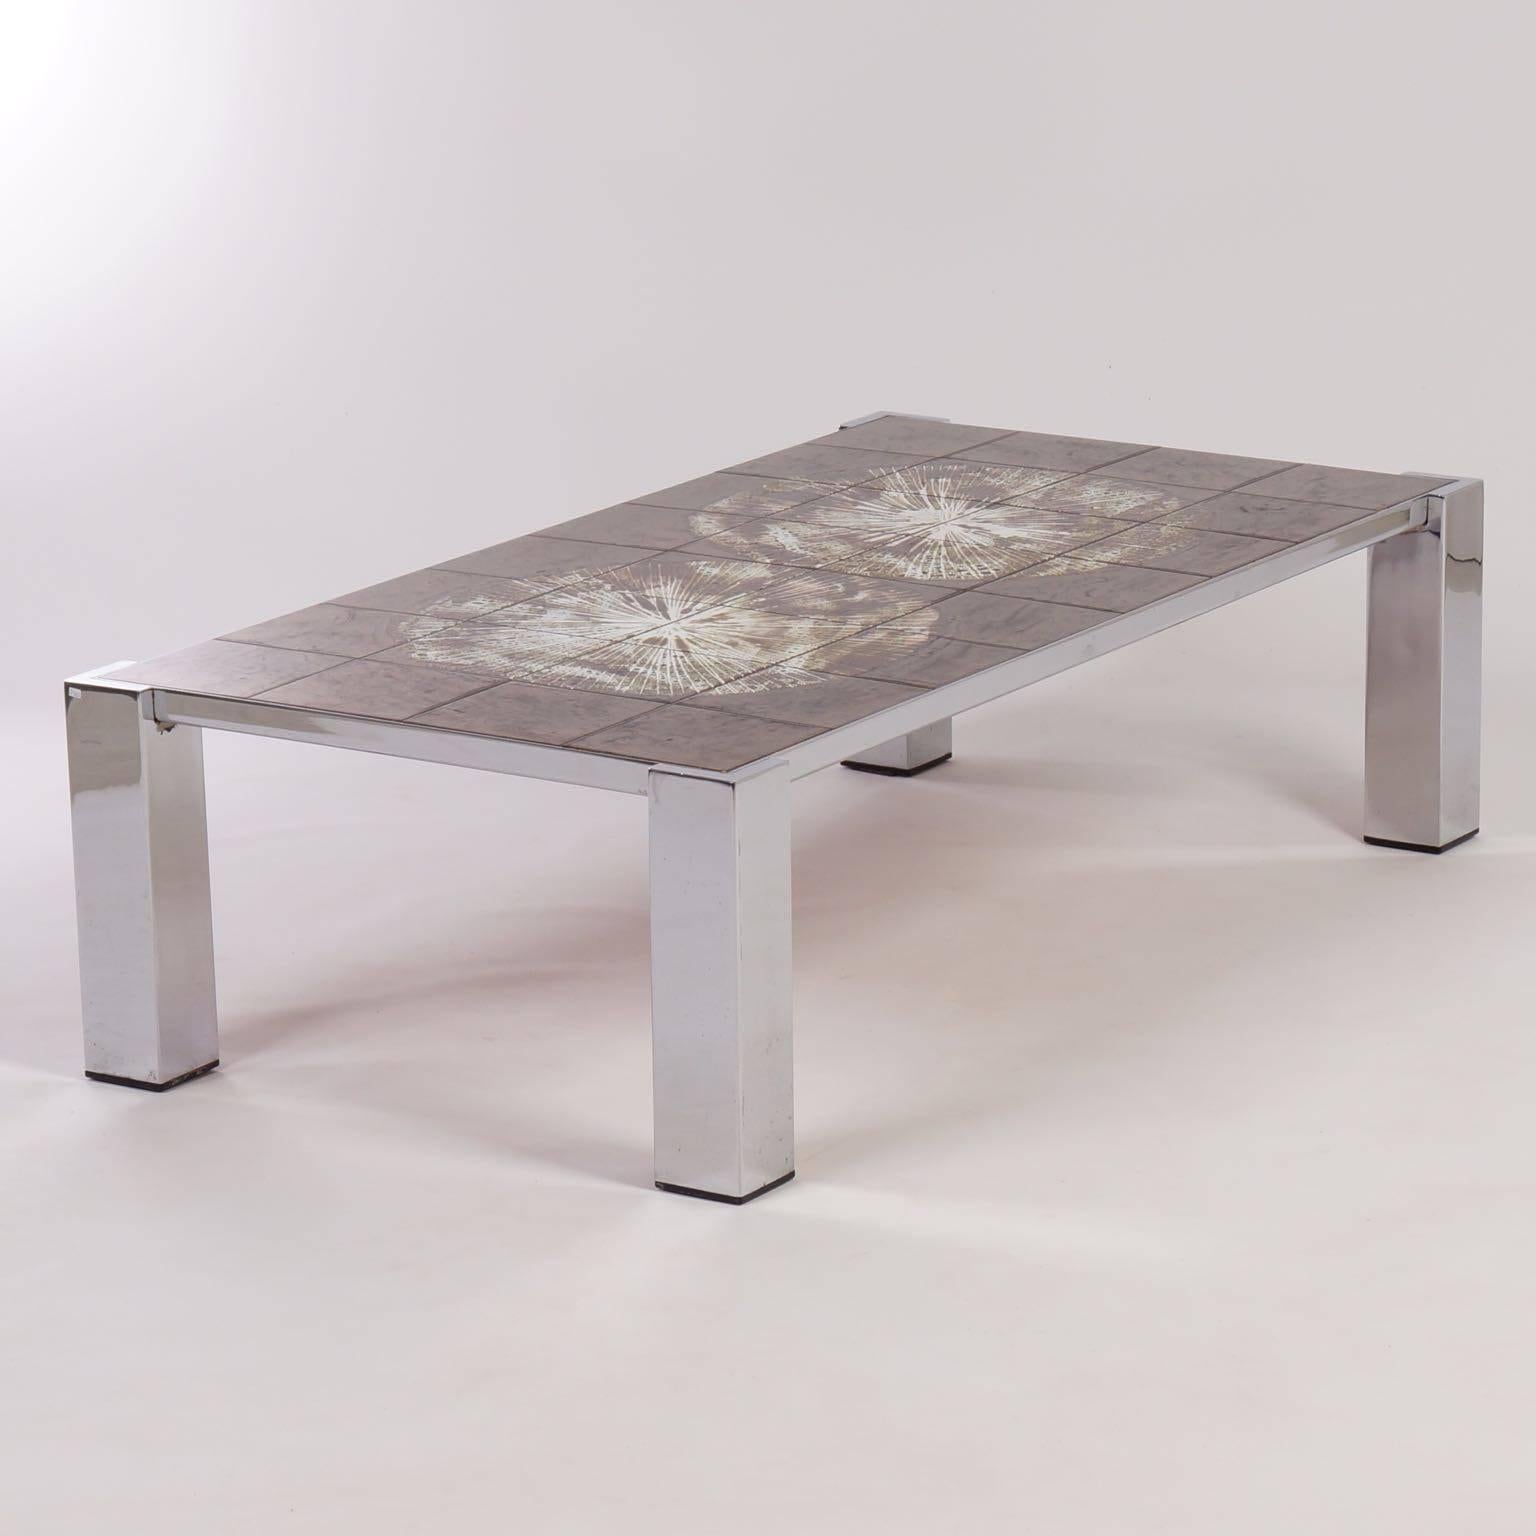 Mid-Century Modern Hand-Painted Tile Coffee Table by Belarti, 1960s For Sale